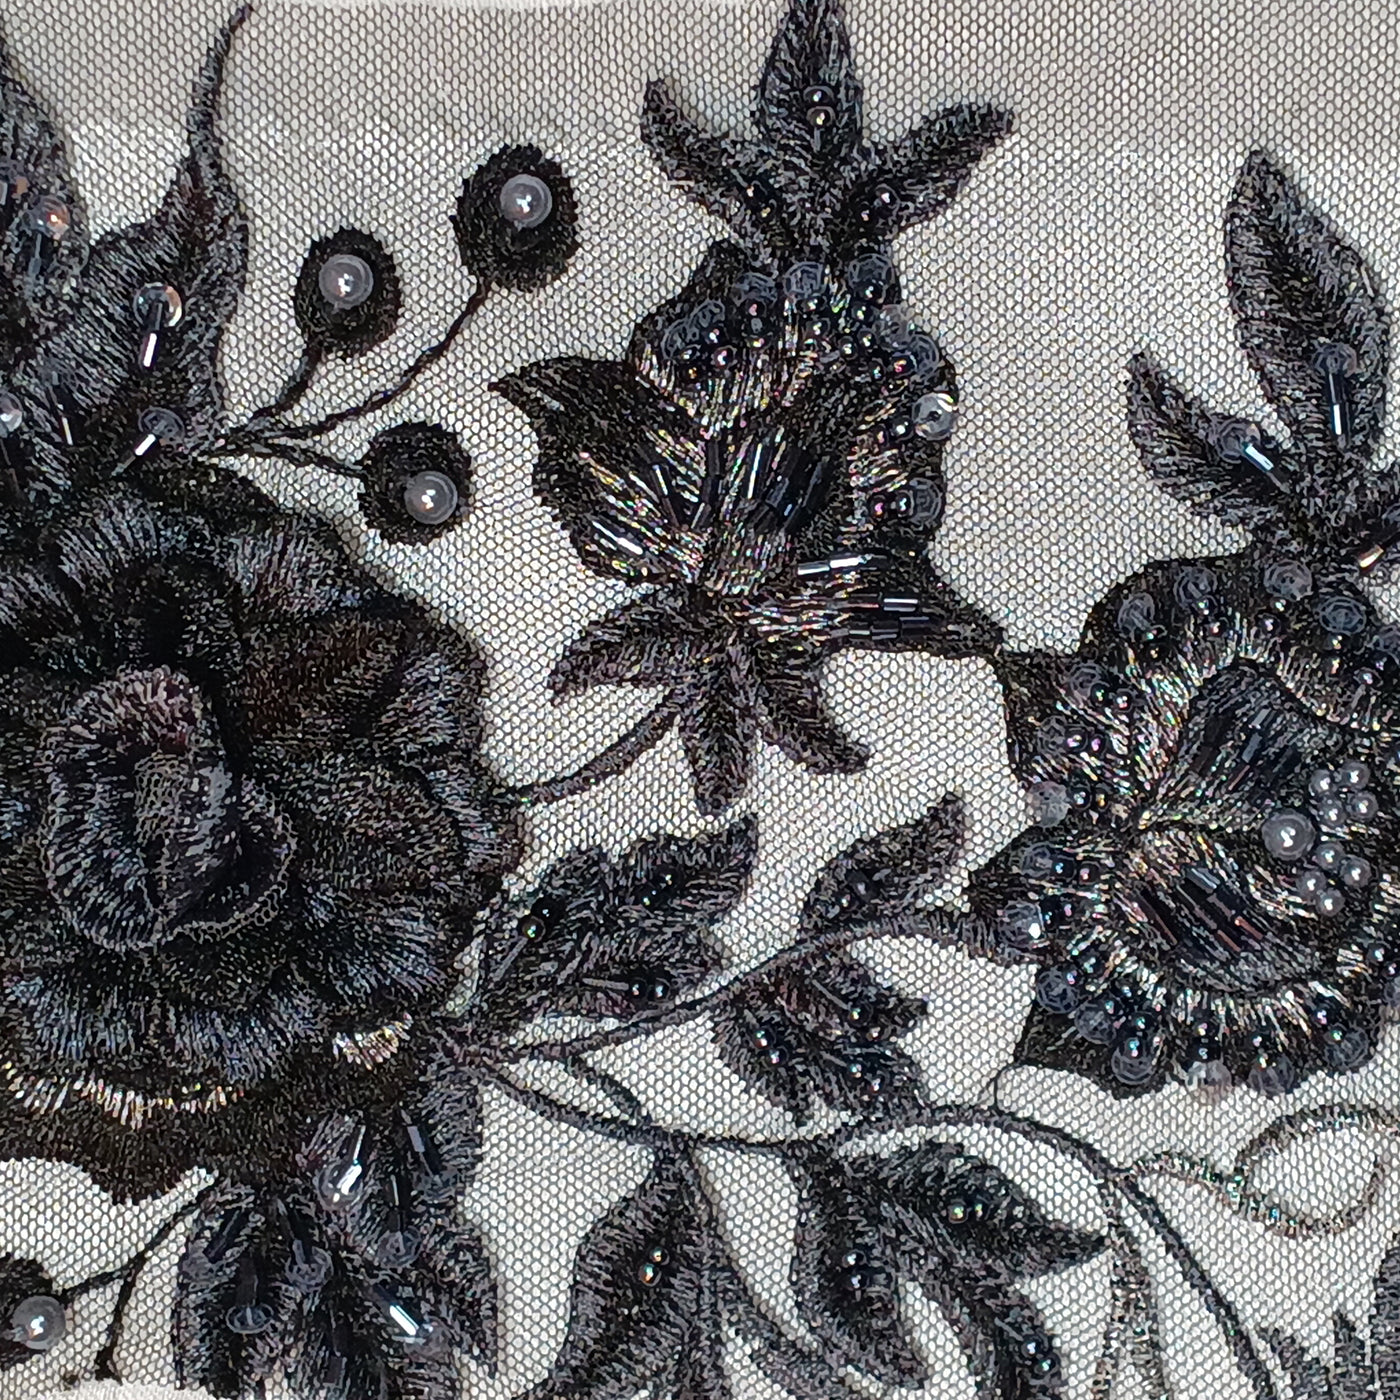 3D Floral Embroidered & Beaded Net Fabric with Beads. Lace USA